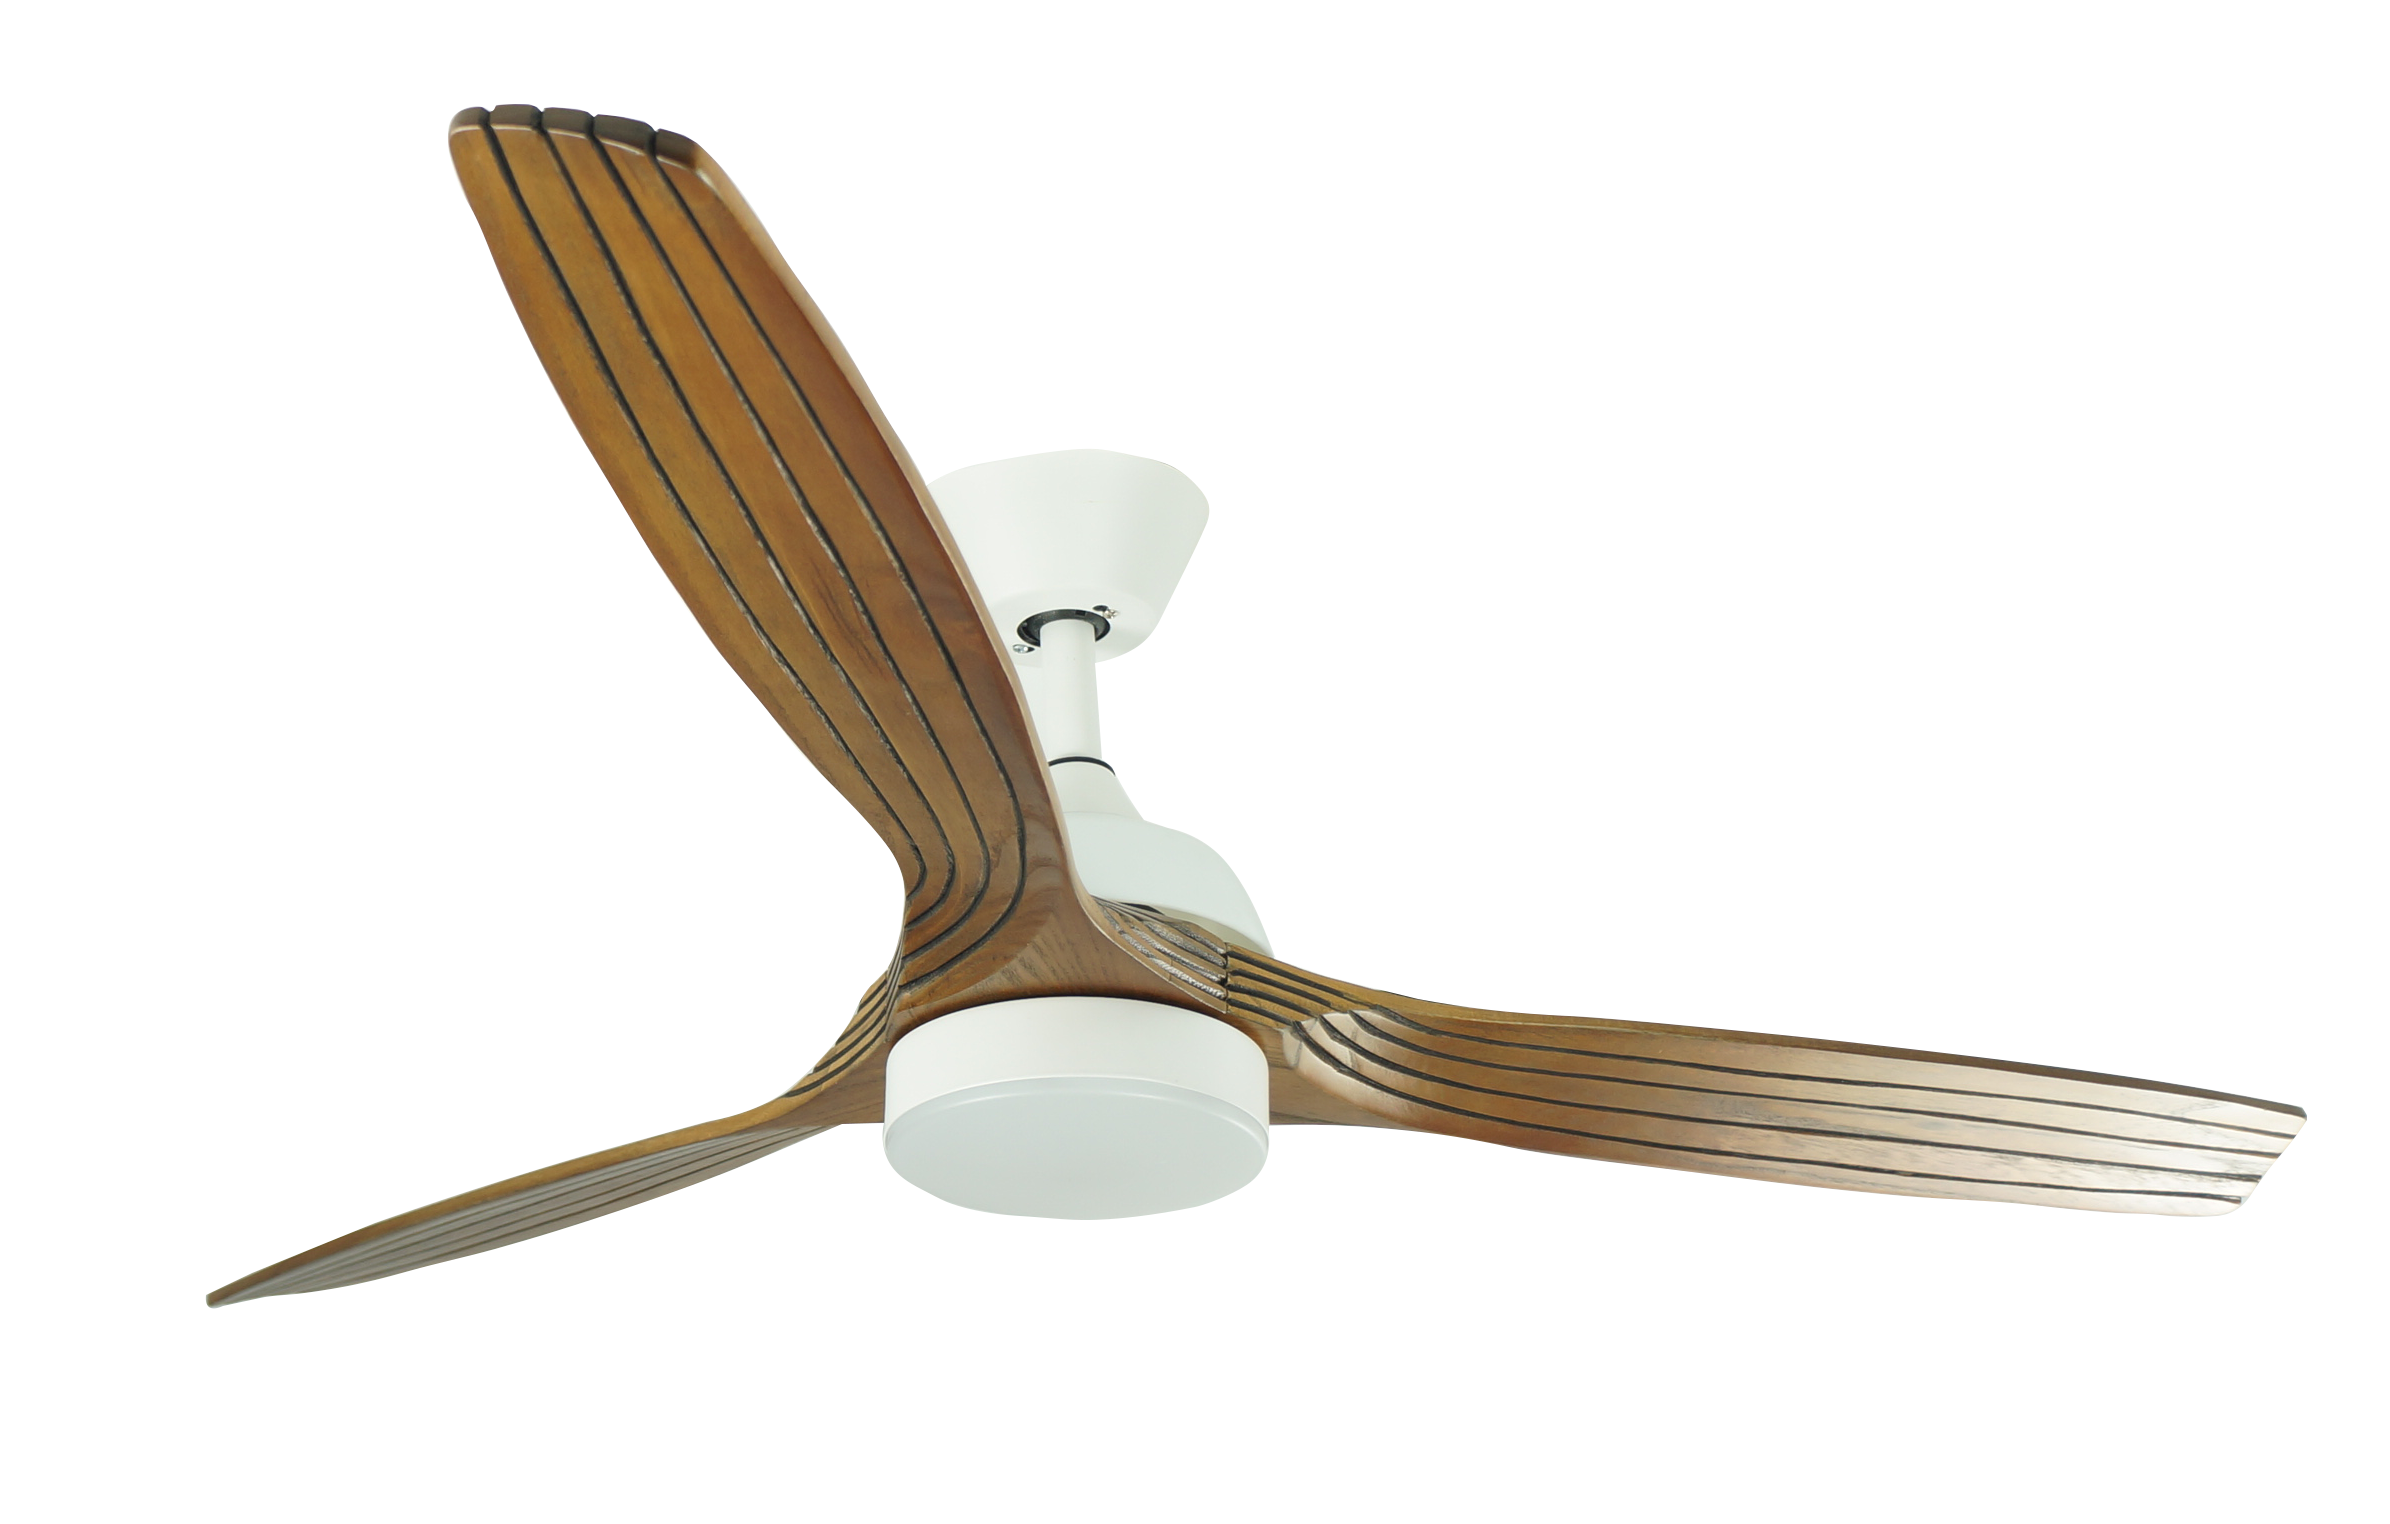 Decorative 42-inch Ceiling Fan with Soft LED Lighting And Whisper-Quiet DC Motor